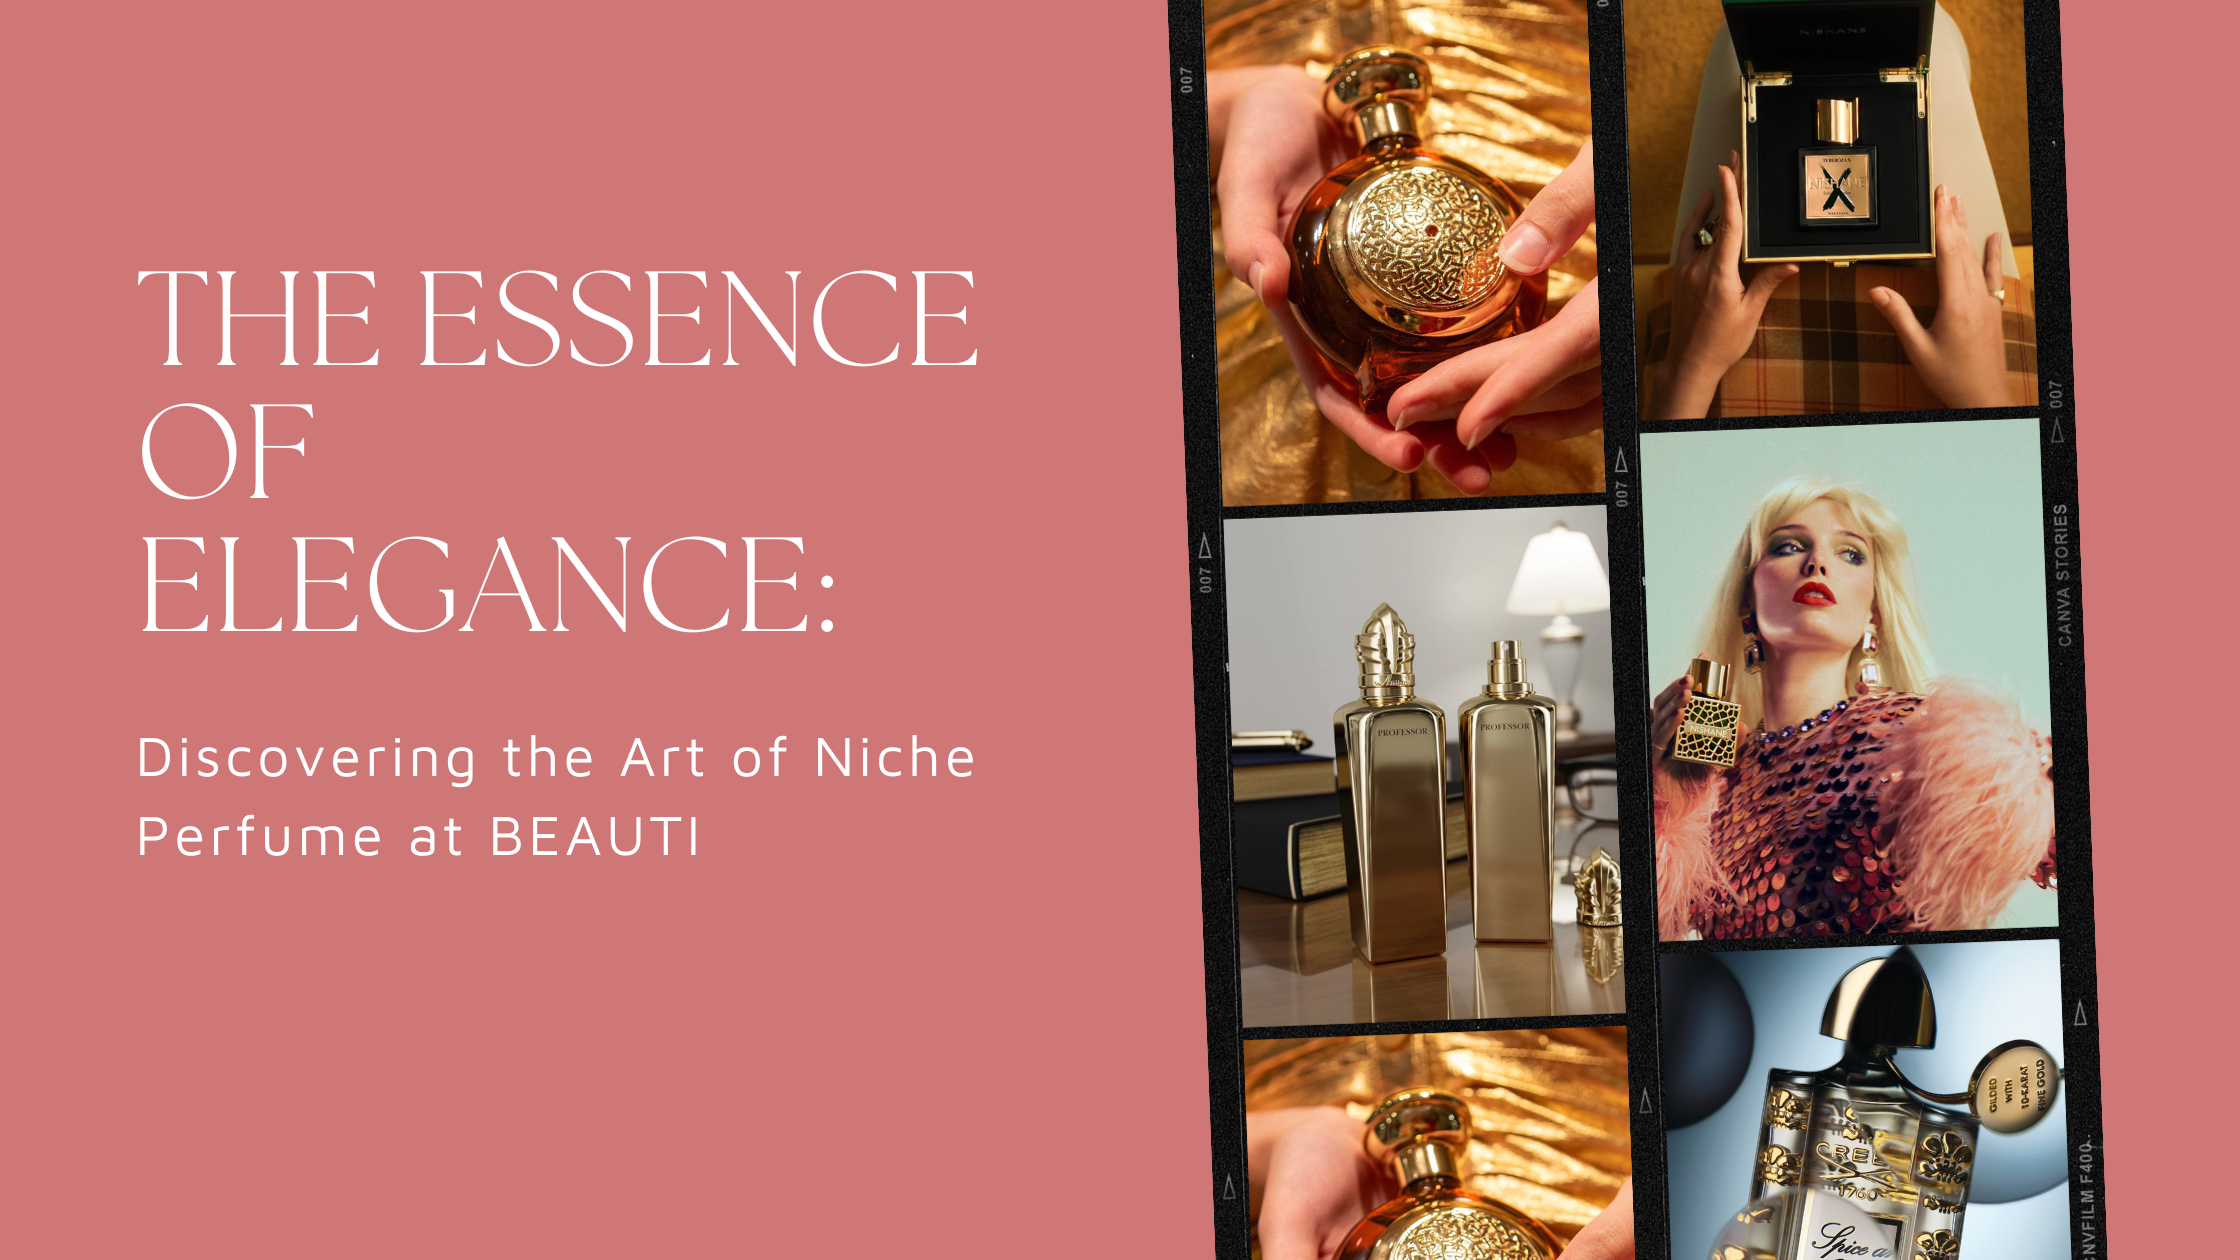 The Essence of Elegance: Discovering the Art of Niche Perfume at BEAUTI